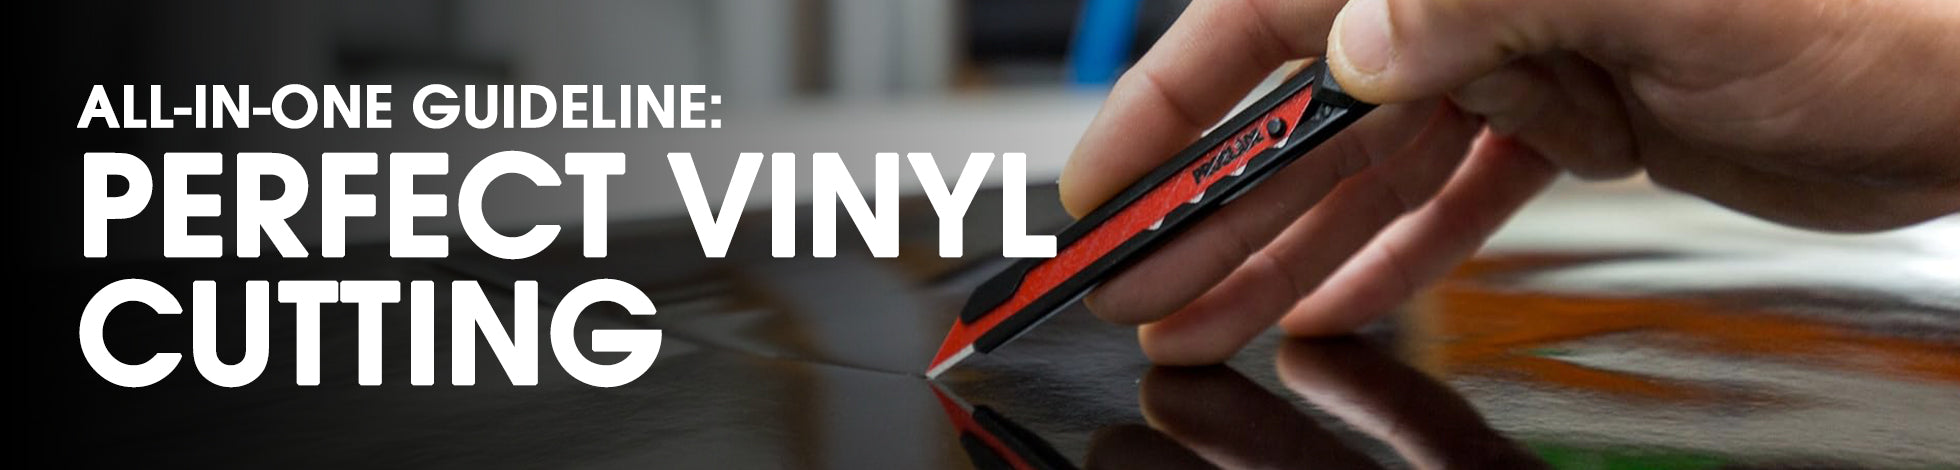 All-In-One Guideline: Perfect Vinyl Cutting